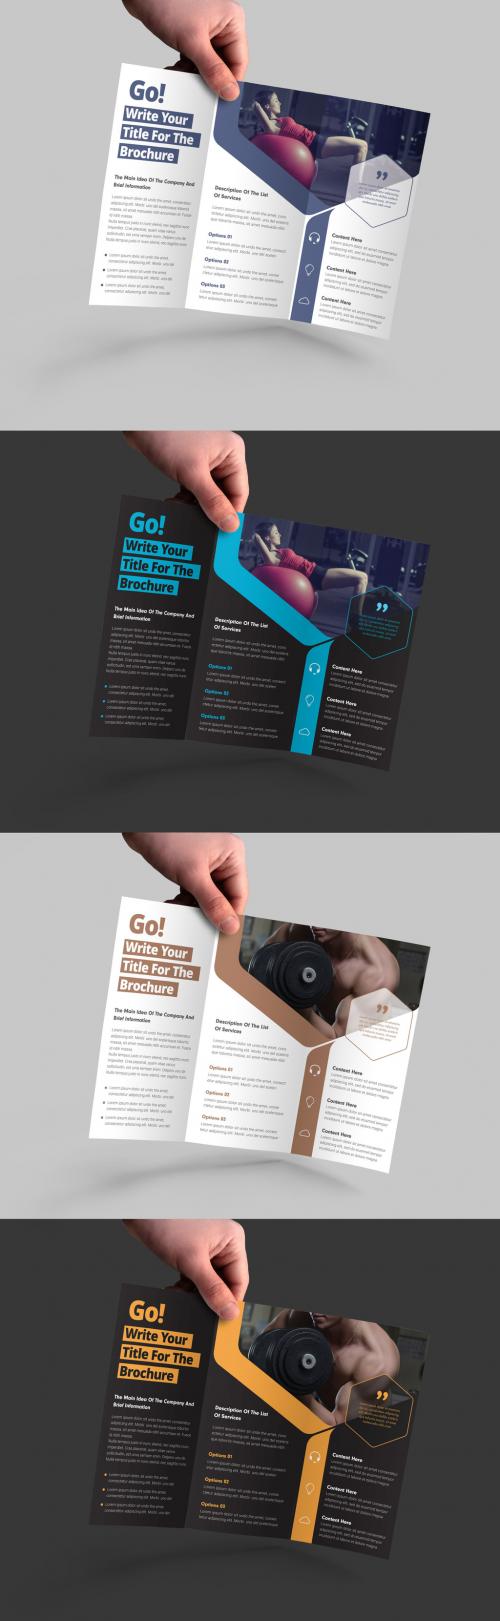 Adobe Stock - Business Brochure with Polygon Elements - 210713360